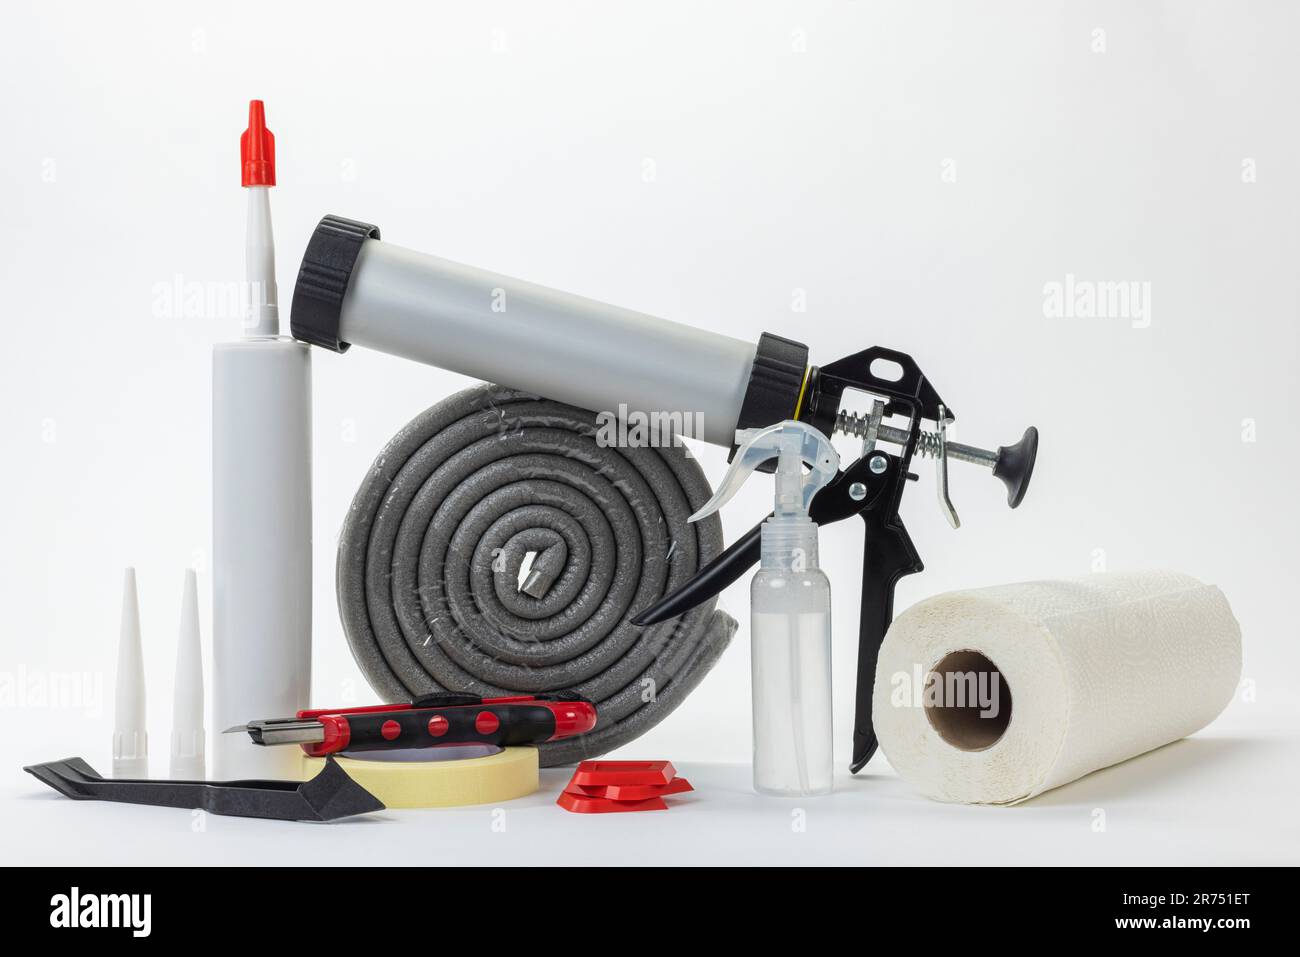 Cartridge press next to it silicone cartridge, tools and materials to renew silicone joints, white background, Stock Photo